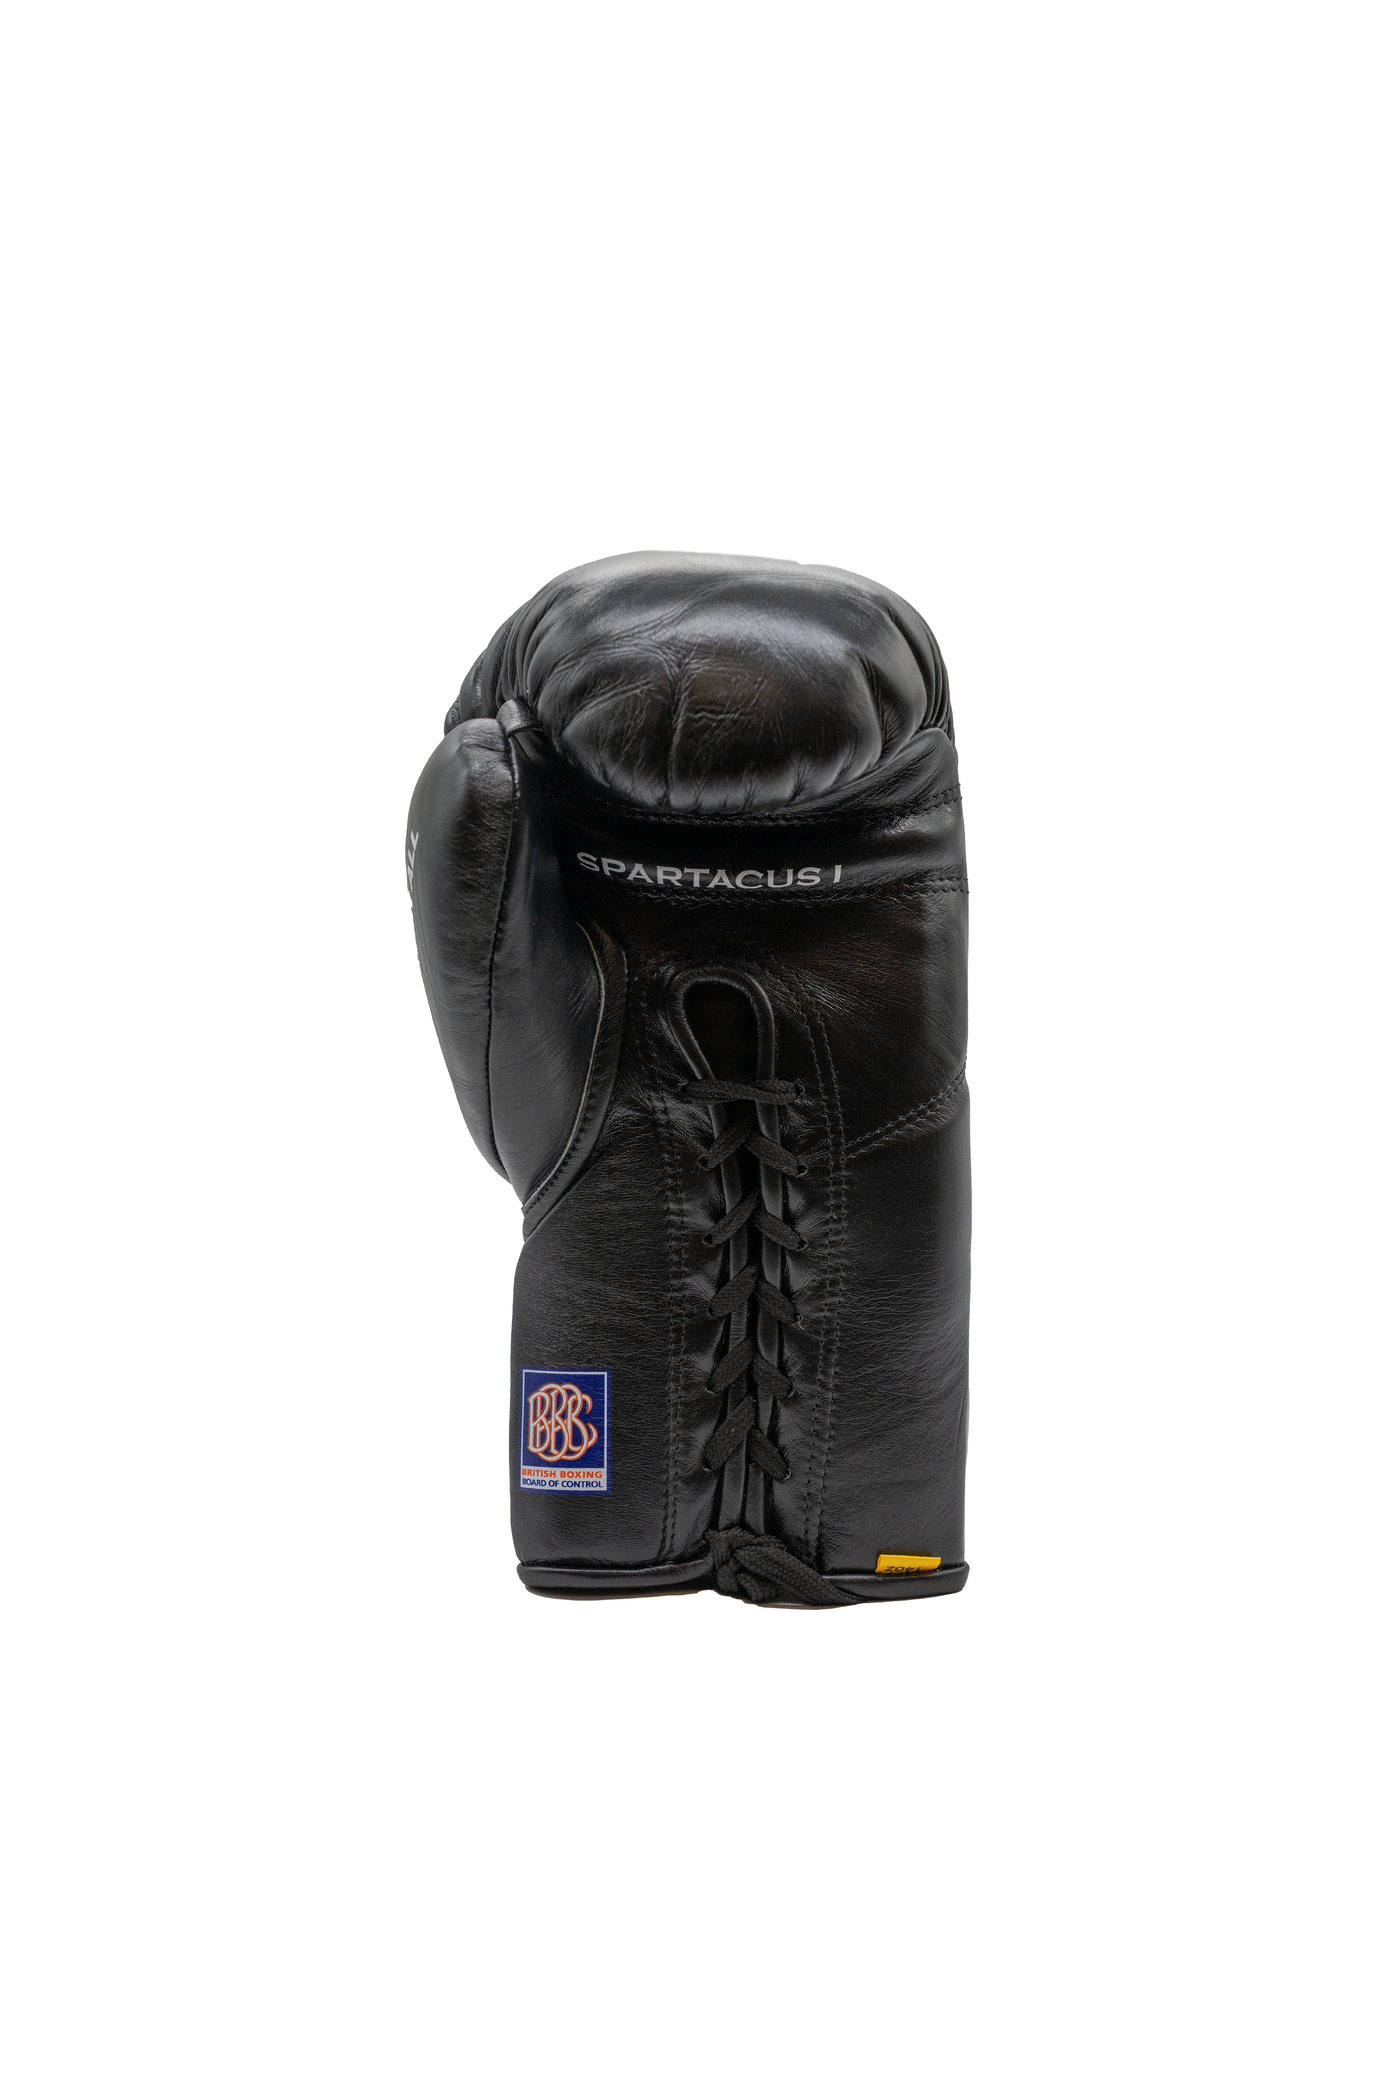 SPARTACUS I Sparring Gloves (Laces)